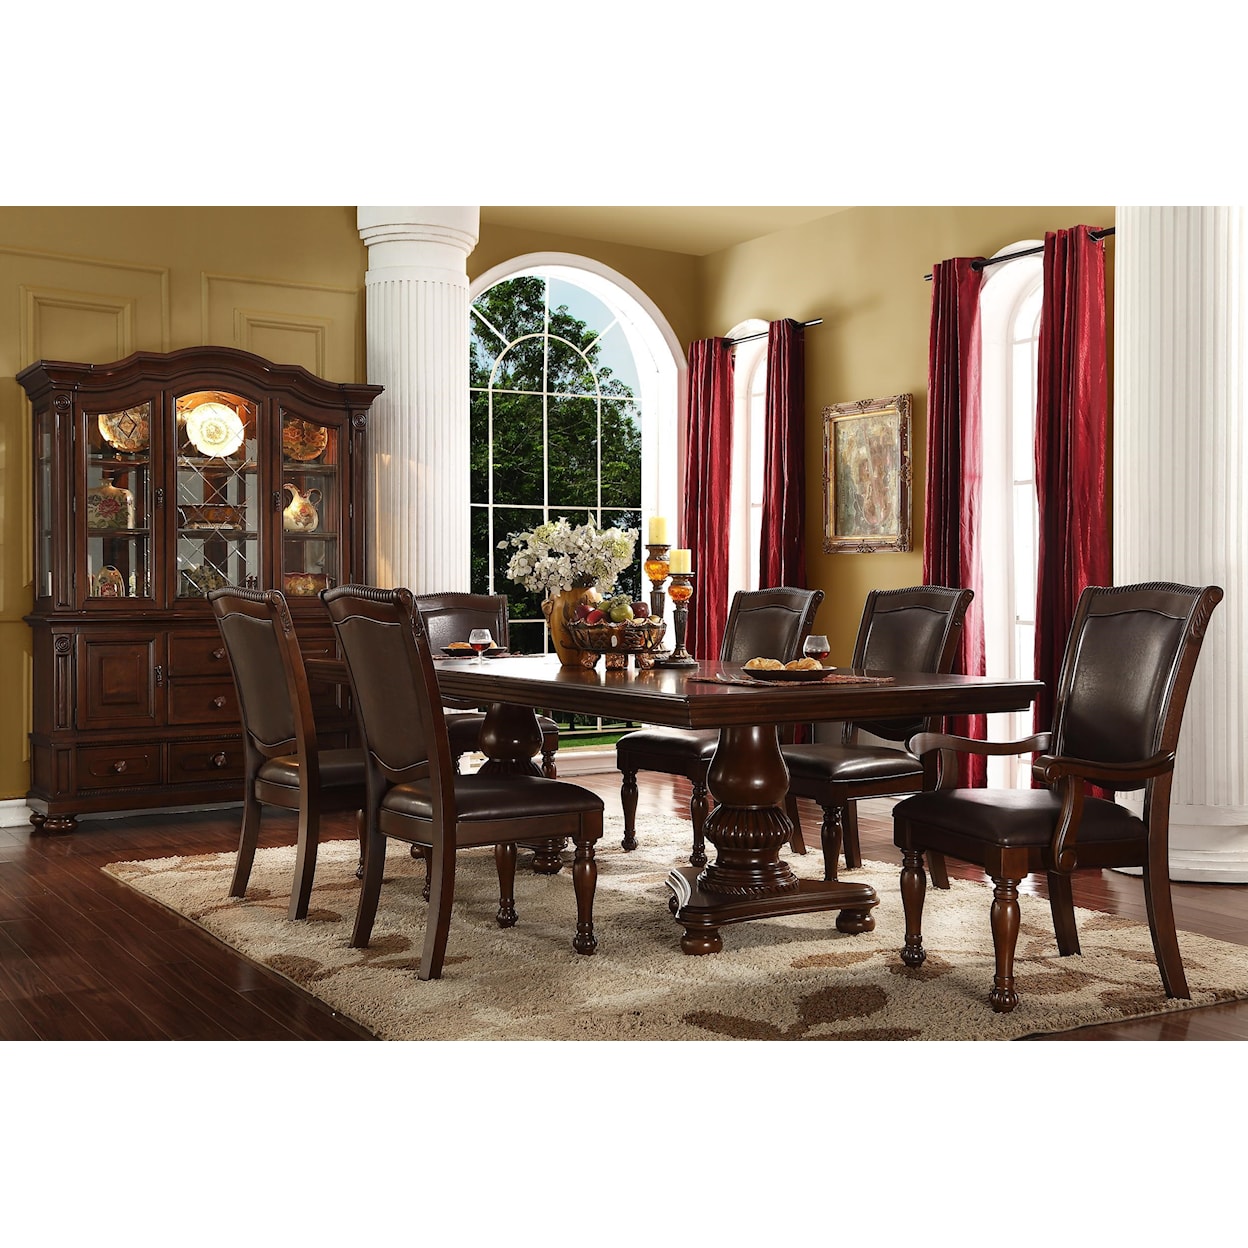 McFerran Home Furnishings D7900 Brown Rich Wood Dining 7PC Table Set